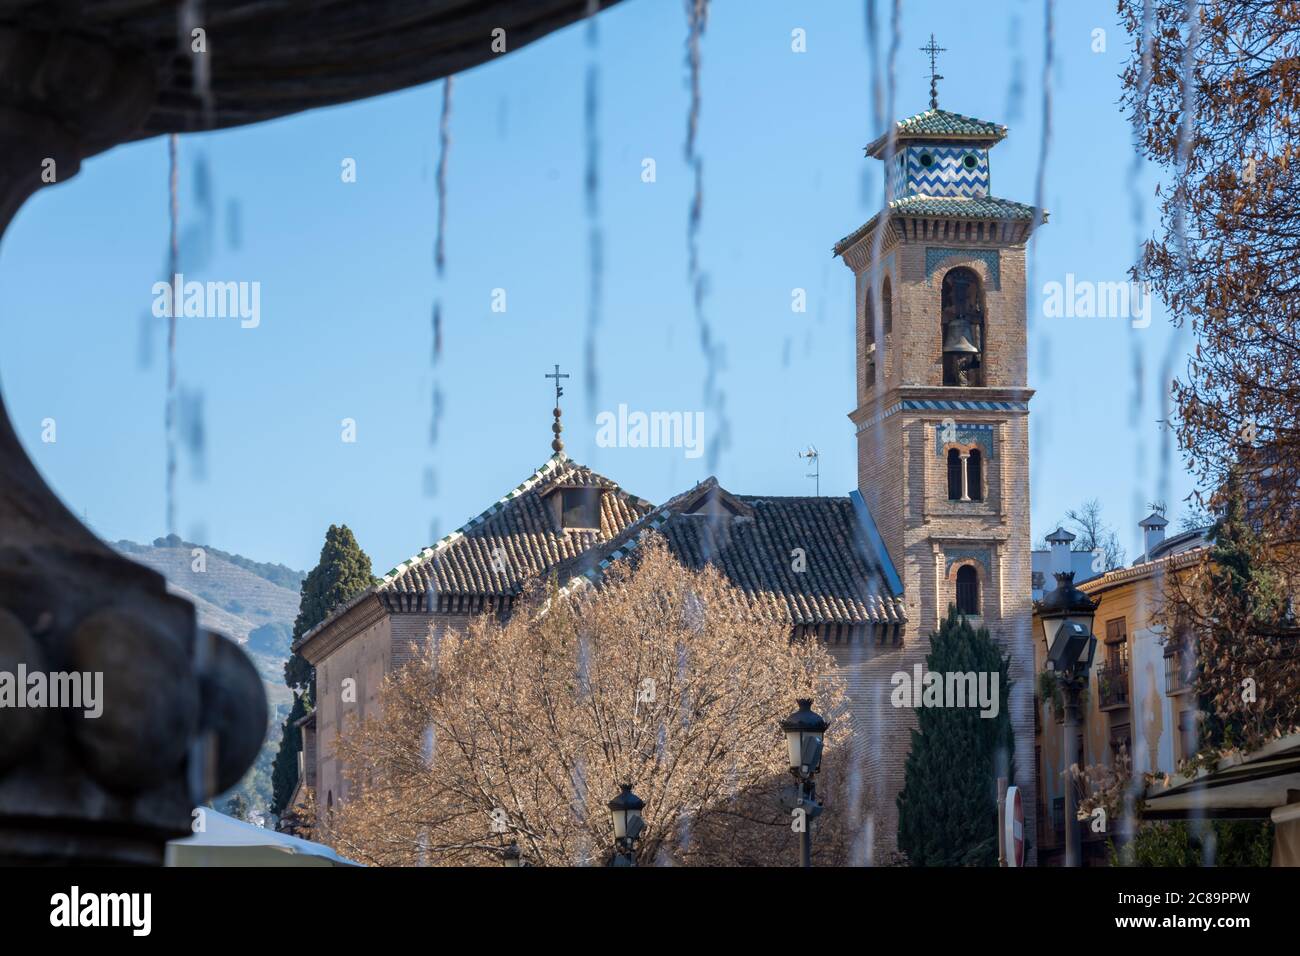 View of the church of Santa Ana de Granada after the jets of water from the Plaza Nueva fountain Stock Photo